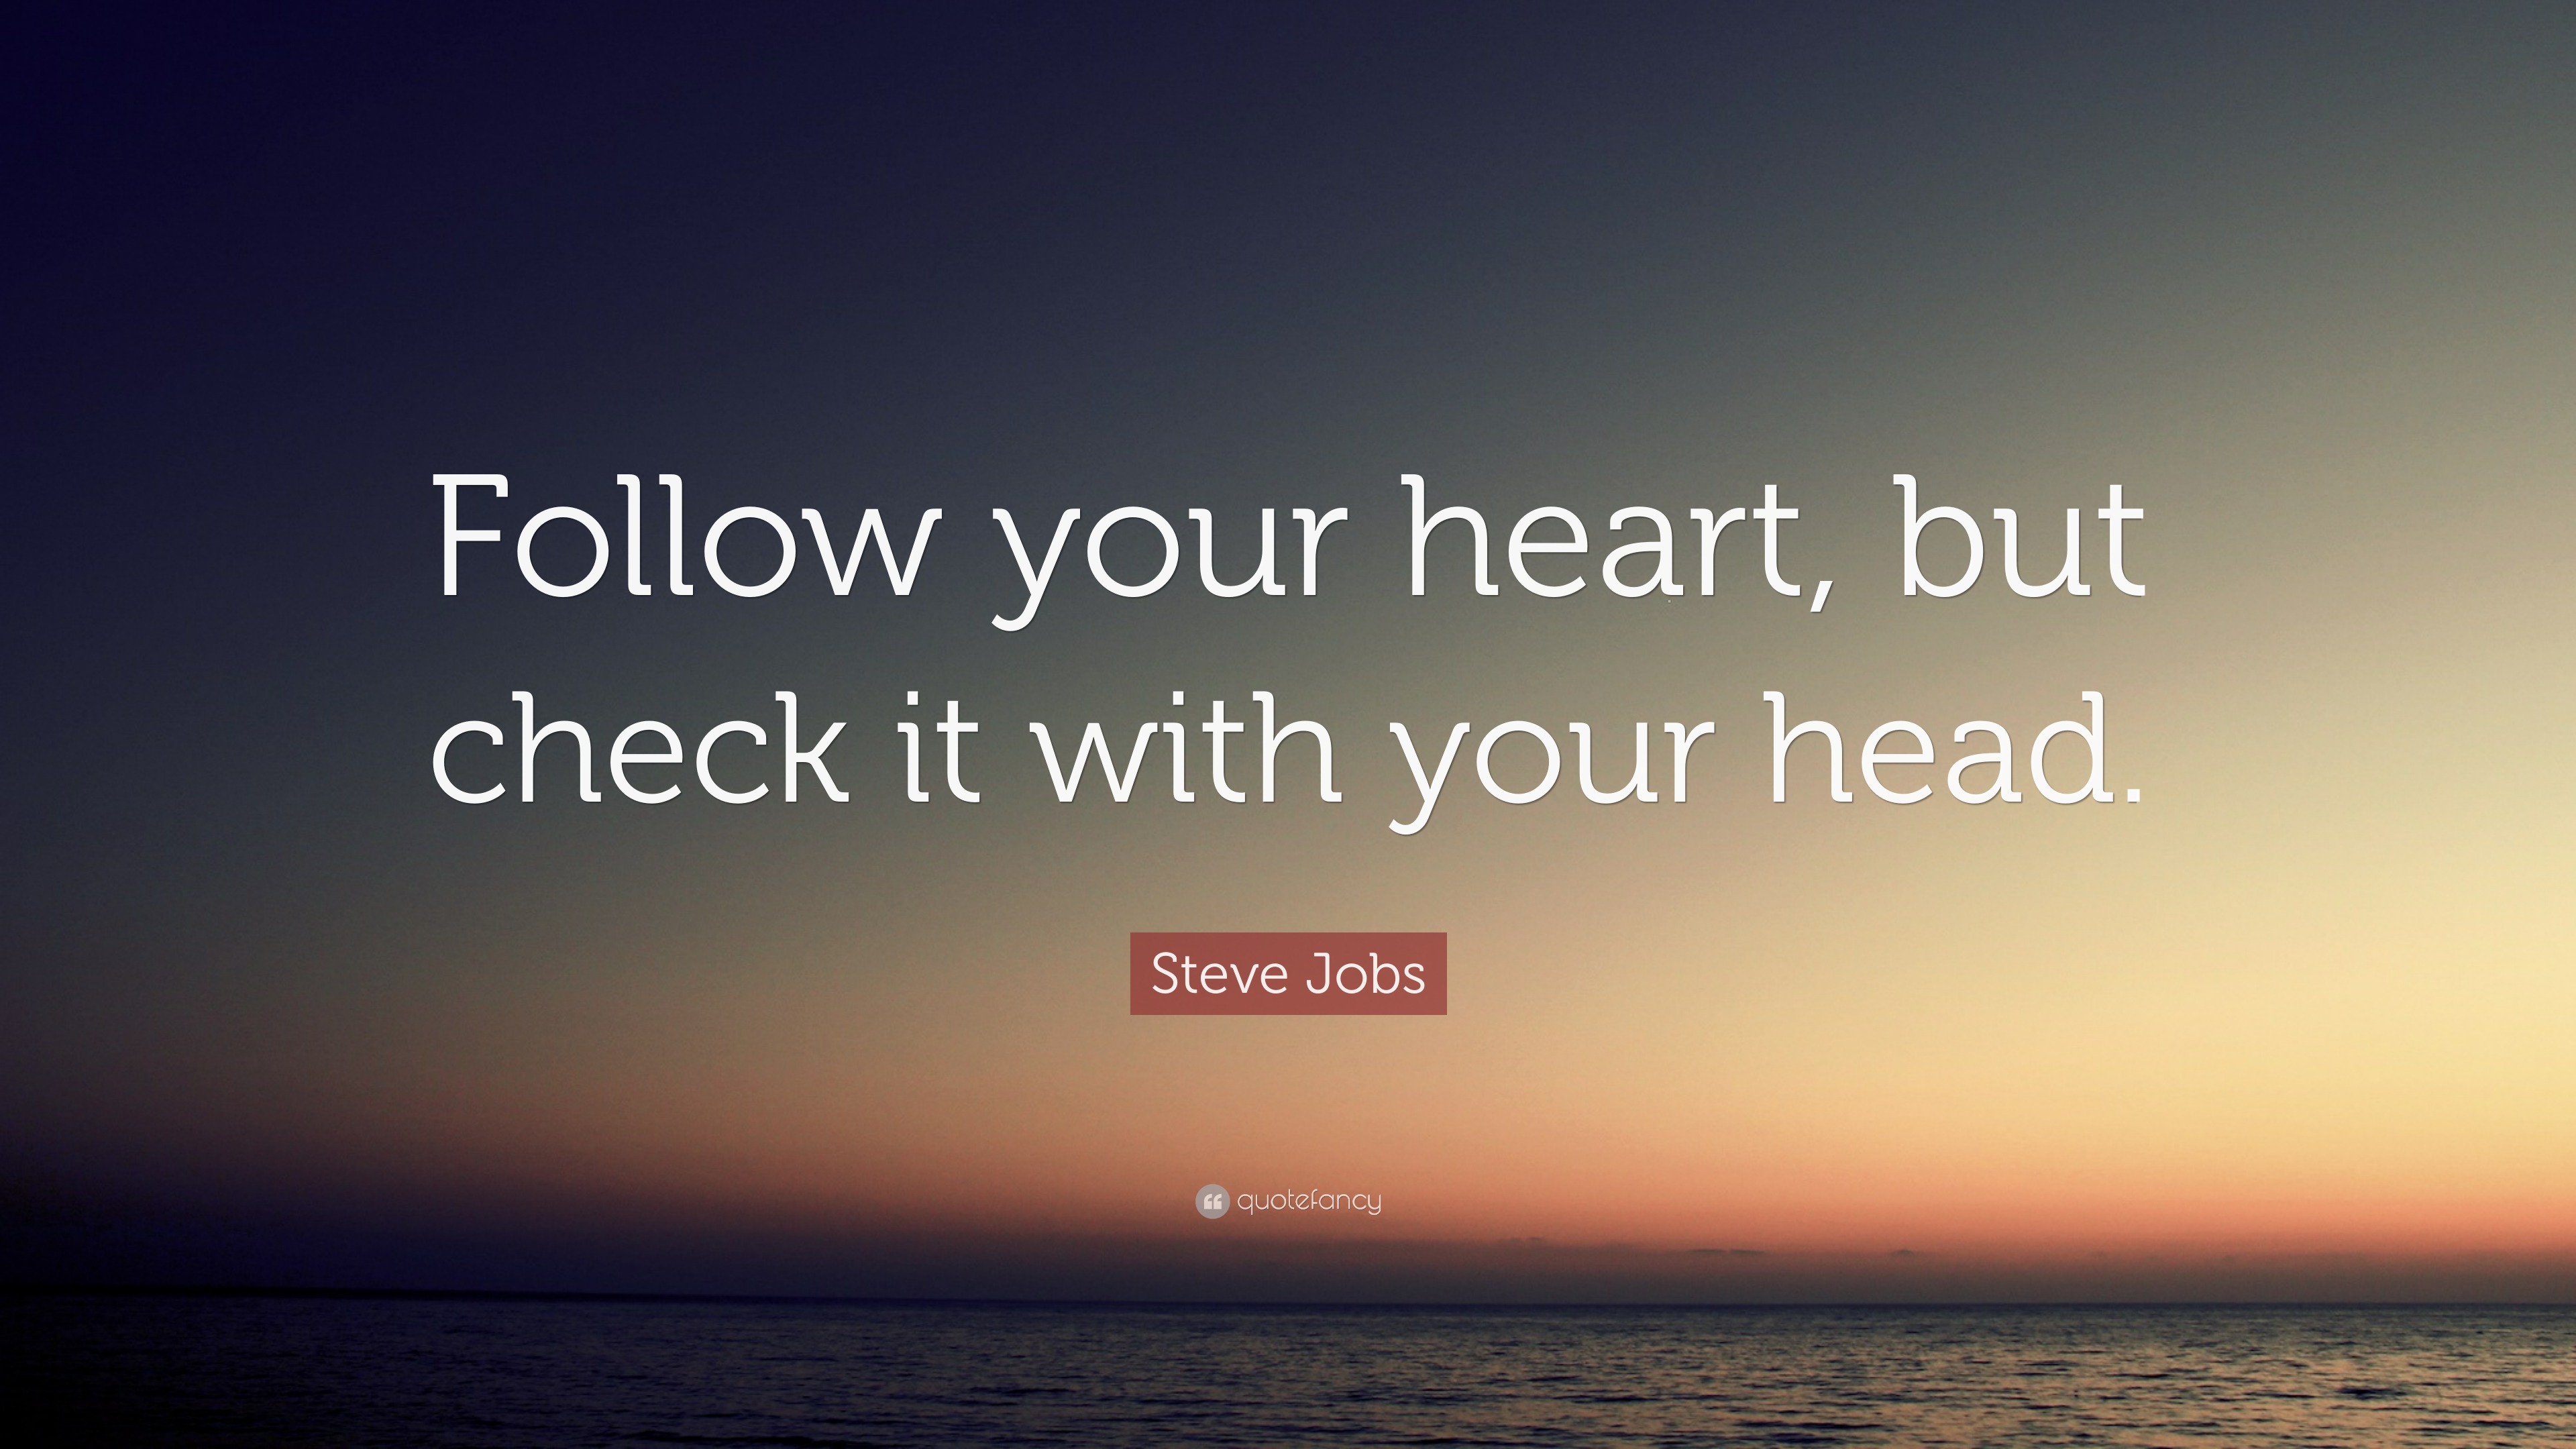 Steve Jobs Quote “follow Your Heart But Check It With Your Head” 